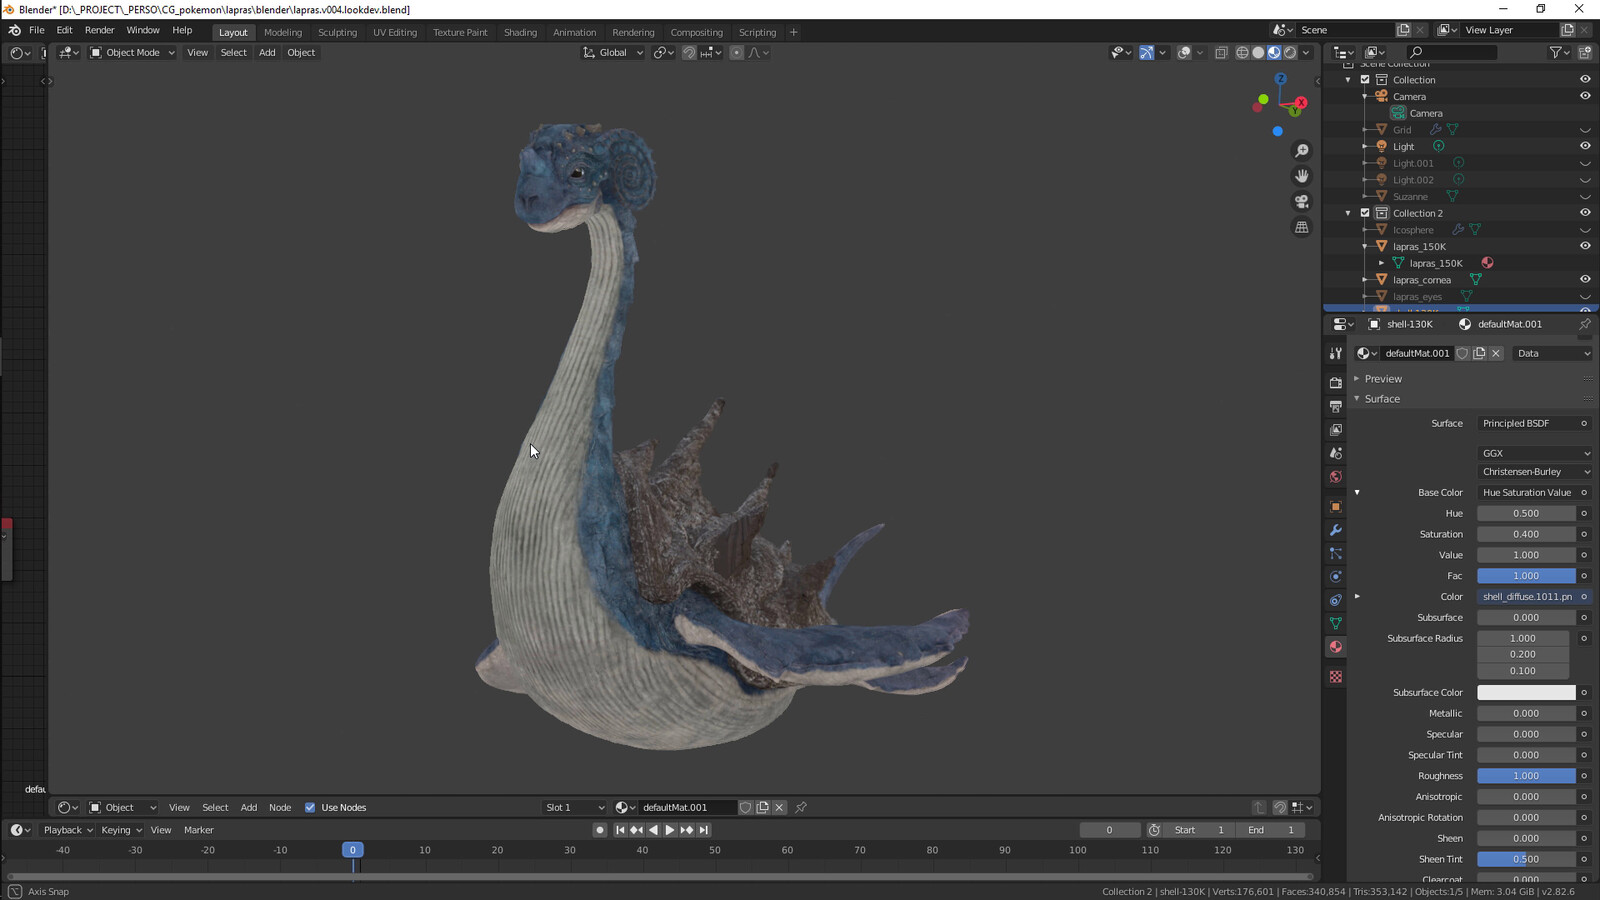 In the video I'm using my lapras pokemon as an example to check Blender 2.82  ability to load multiple texture tiles on heavier mesh. Works fine ! 